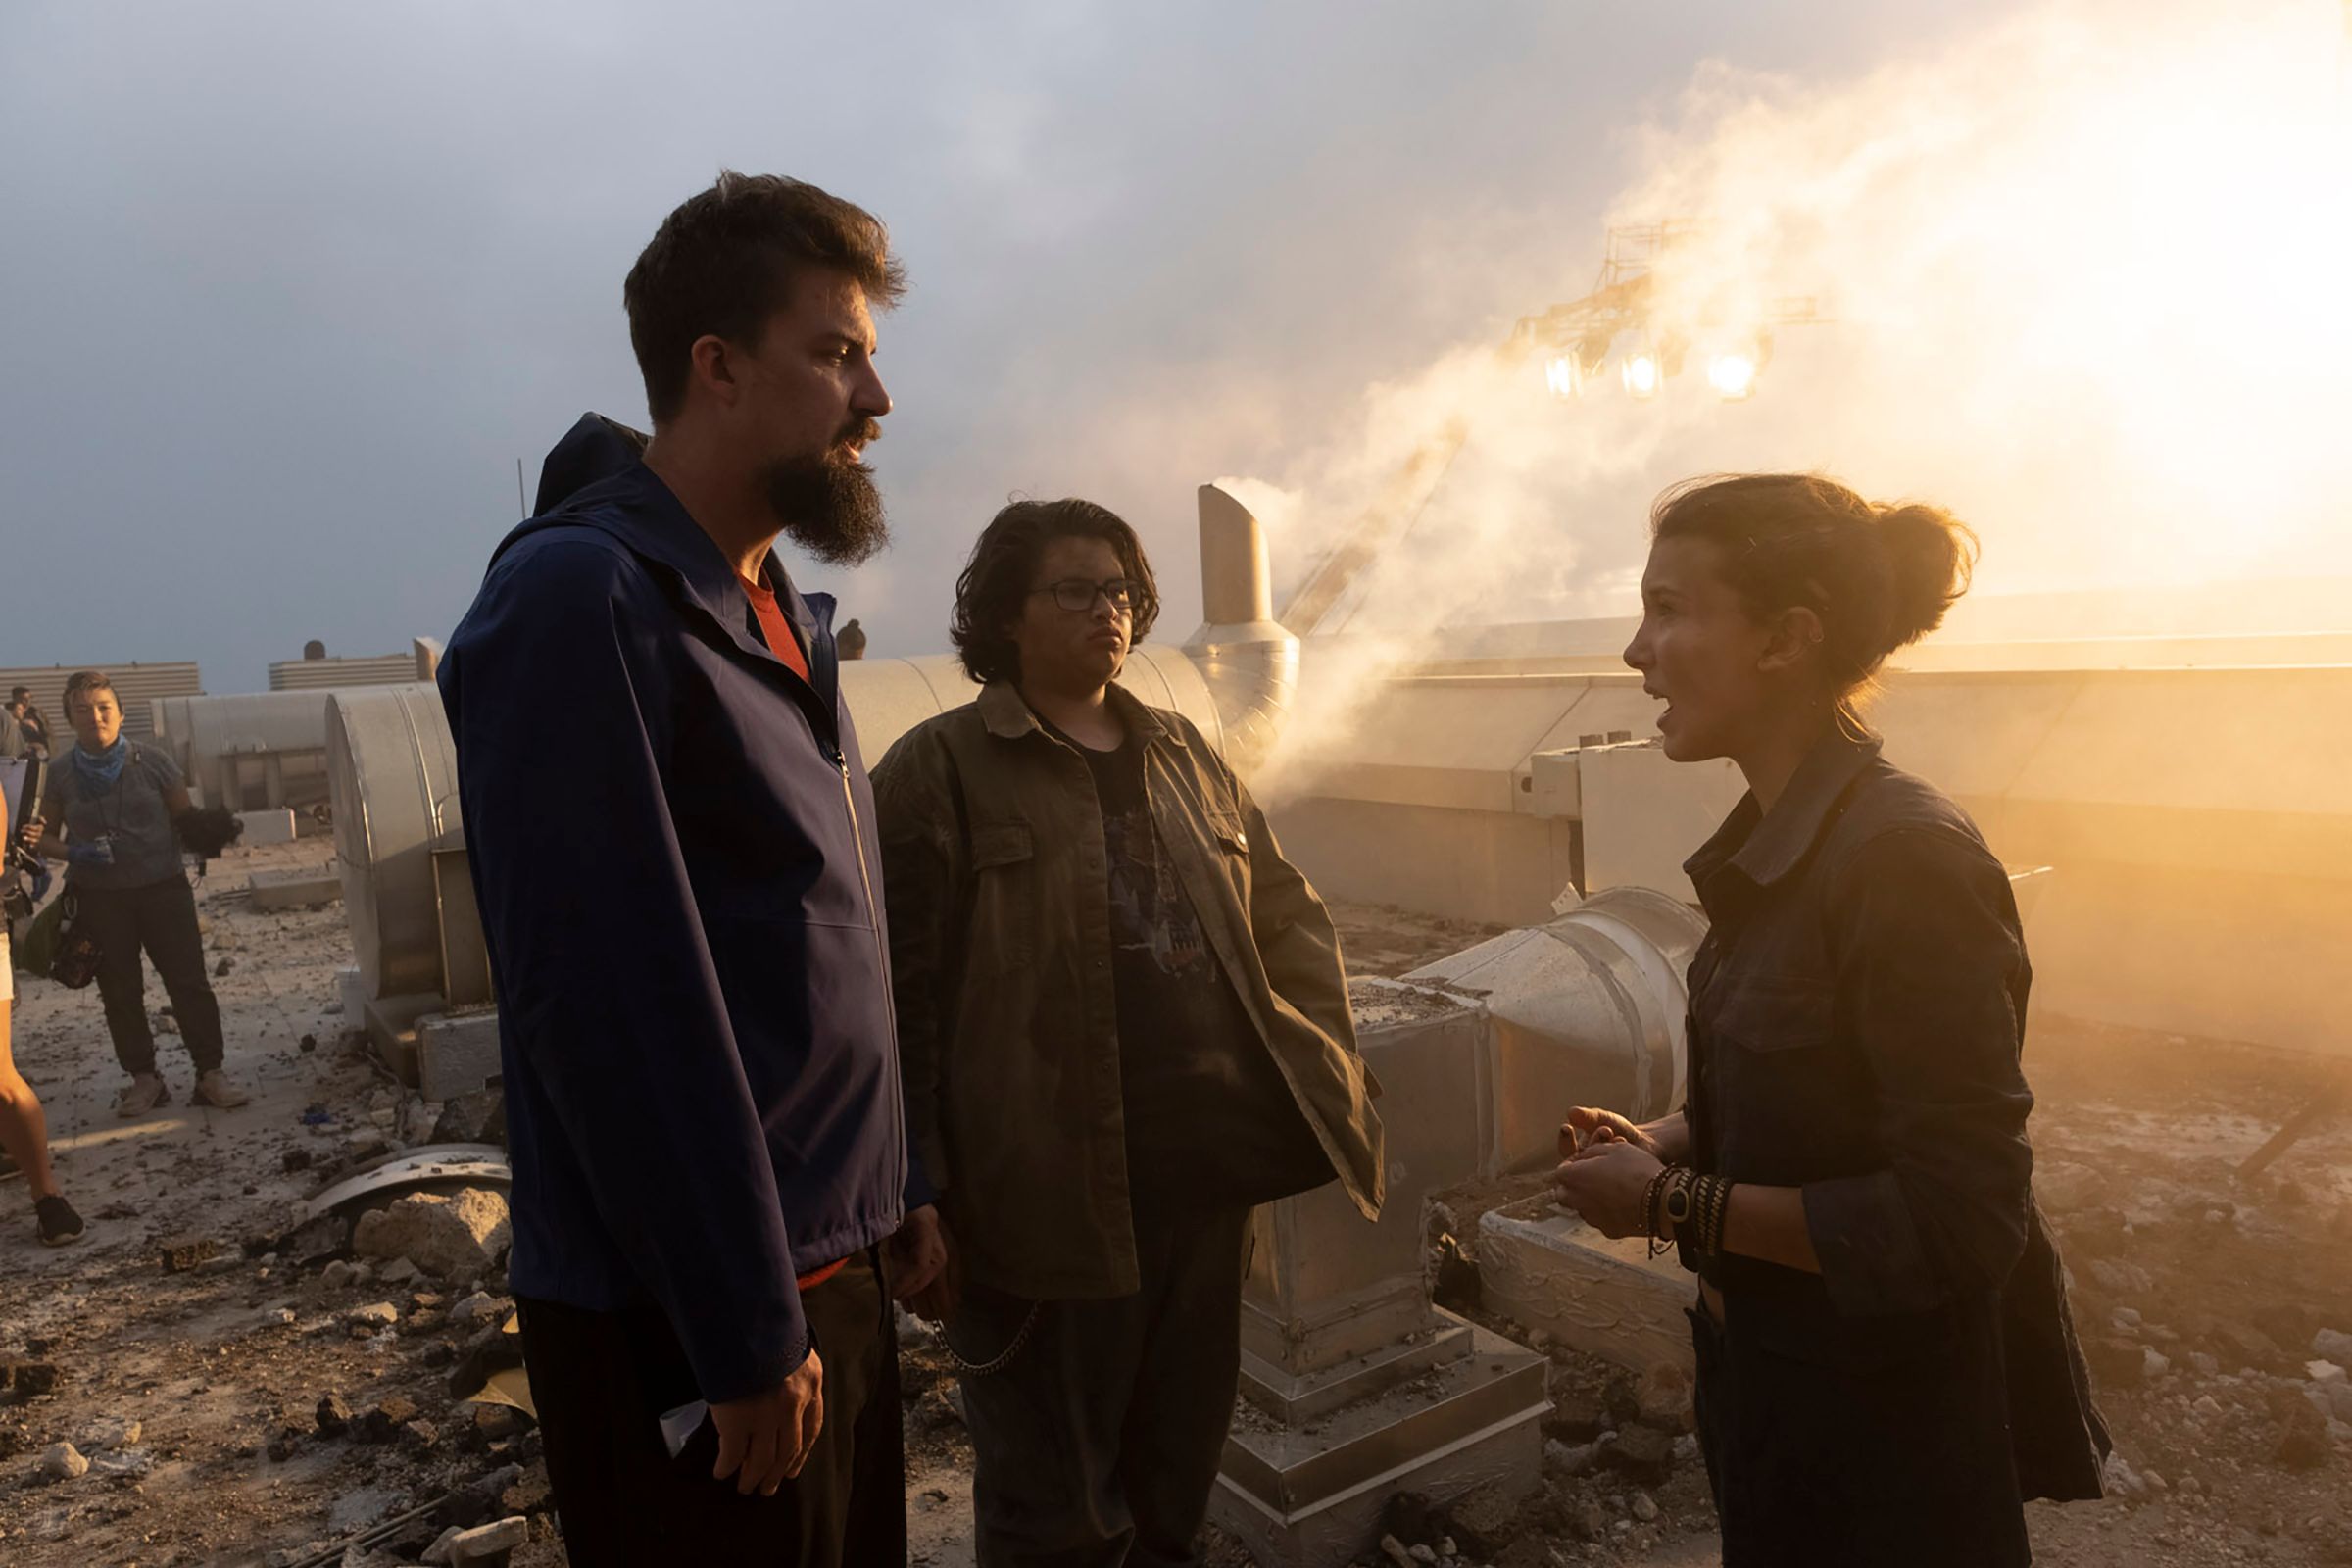 Director Adam Wingard with Millie Bobby Brown and Julian Dennison on the Set of Godzilla vs. Kong